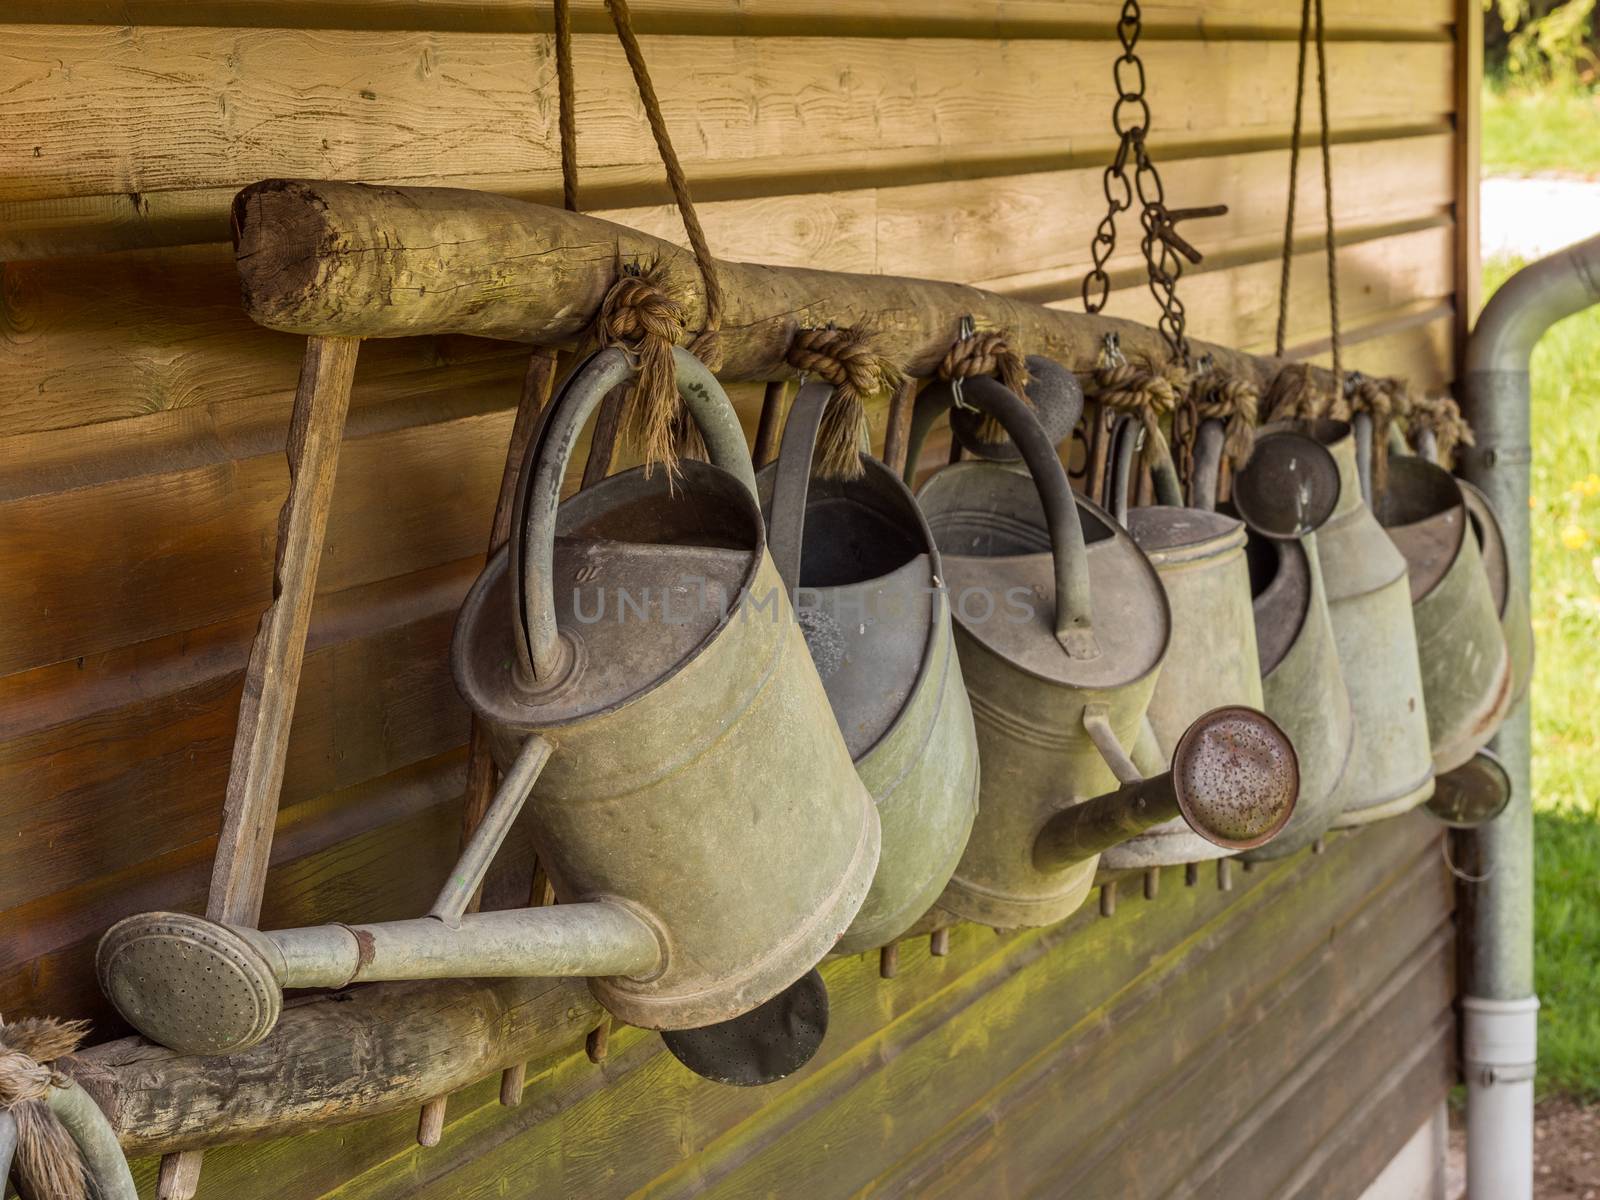 A row of metal watering cans hanging in front of a wooden wall